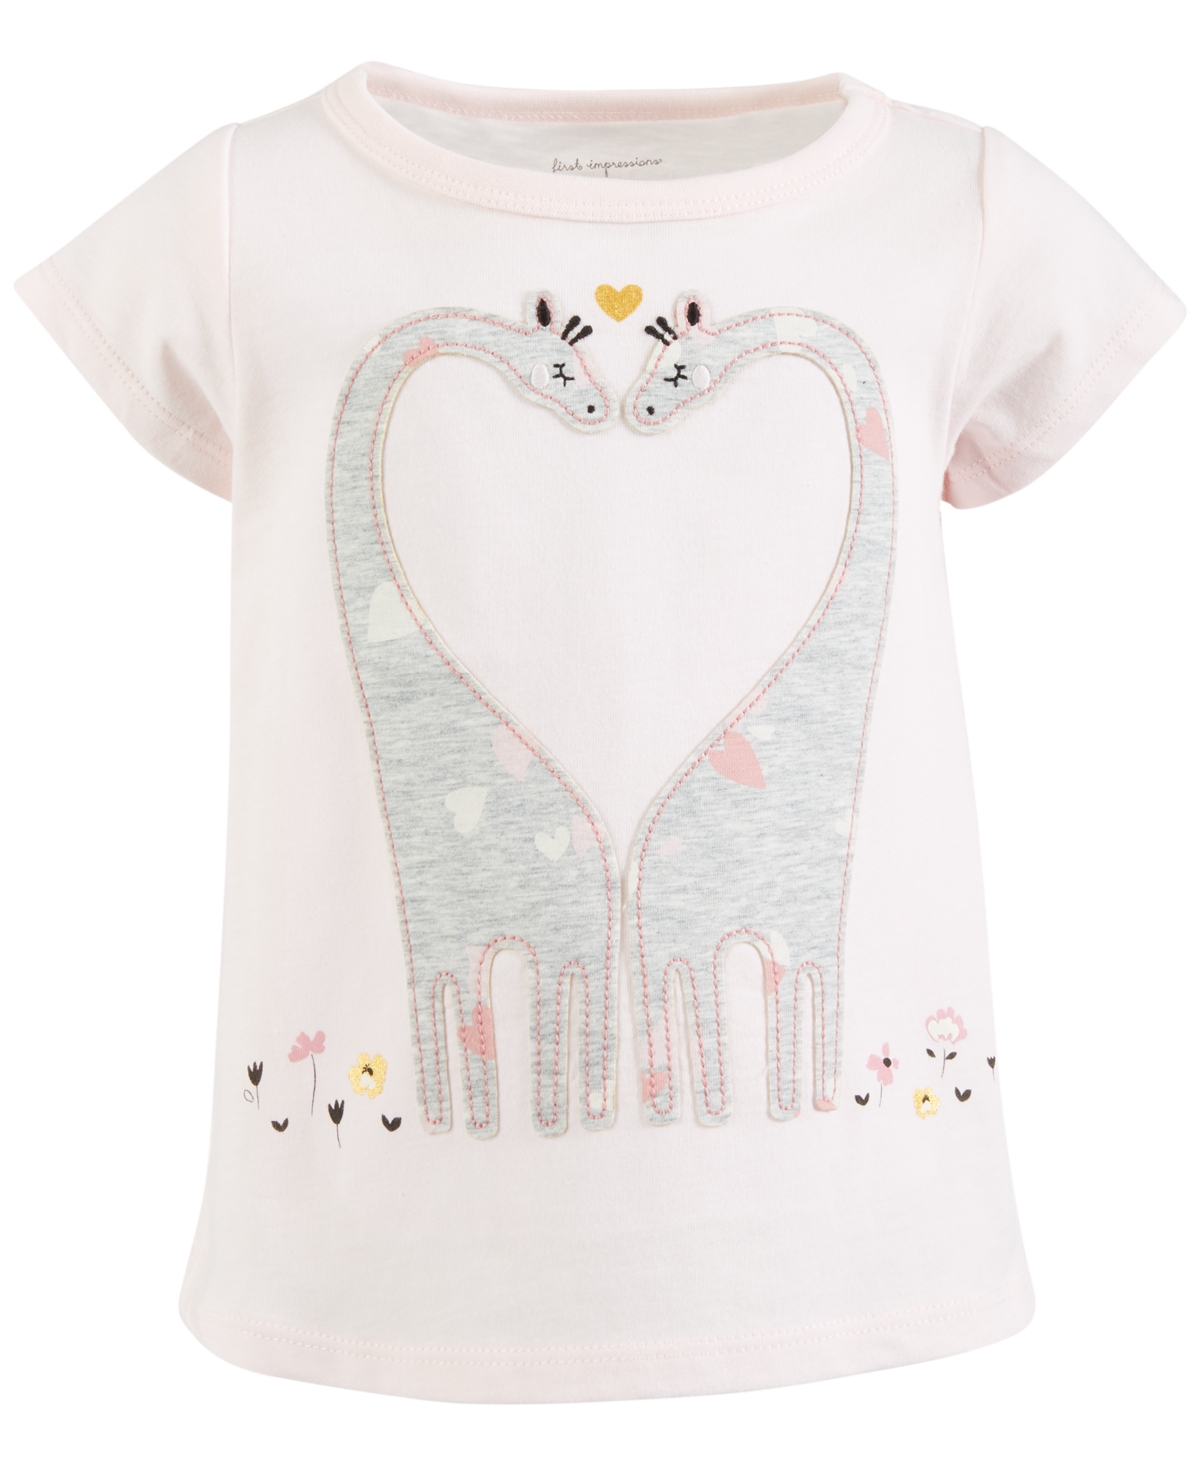 First Impressions Toddler Girls Giraffe Cotton Top, Created for Macy's